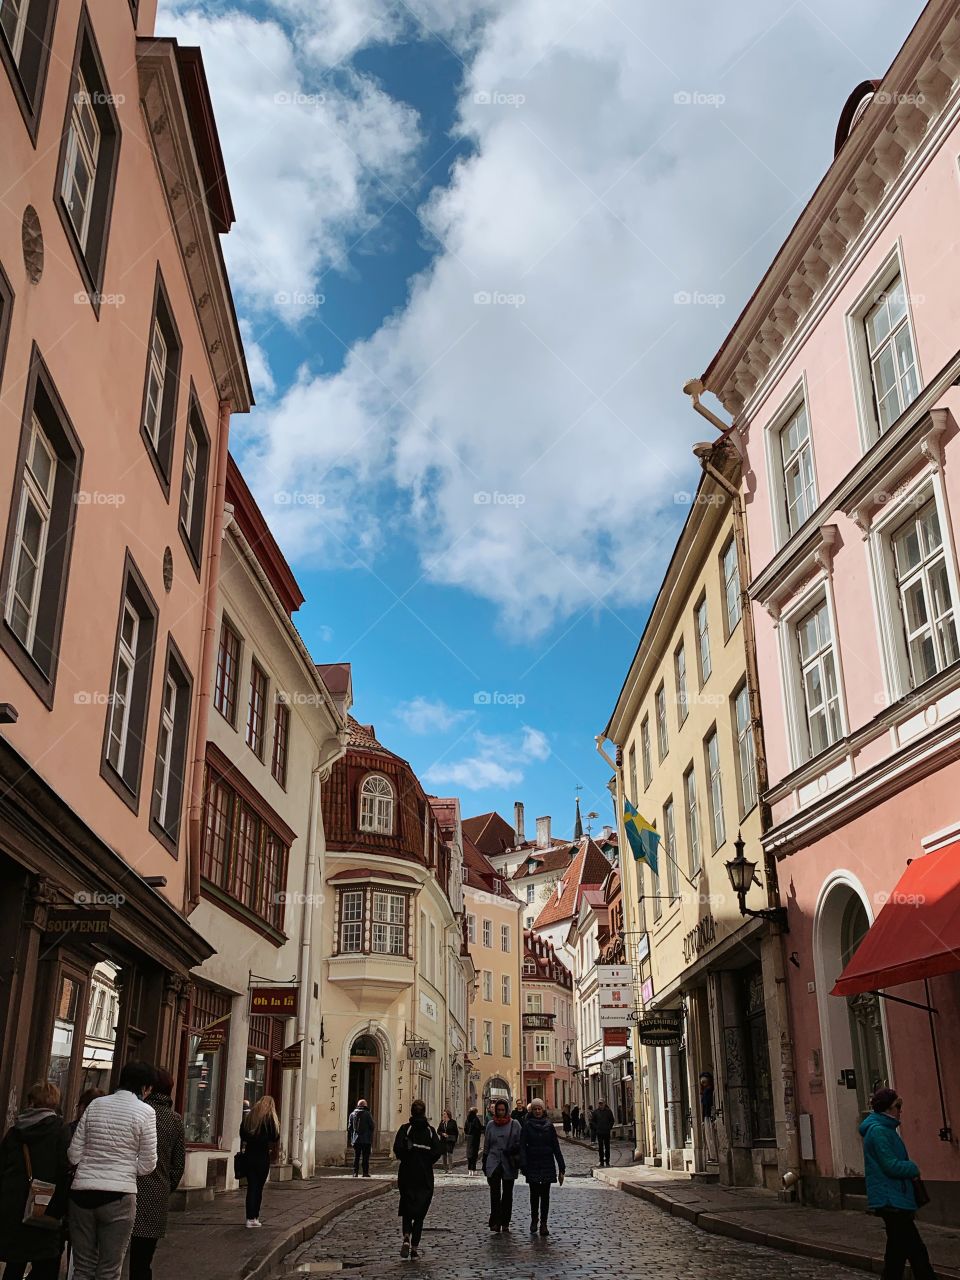 Walking along the Old Tallinn is a great sunny day